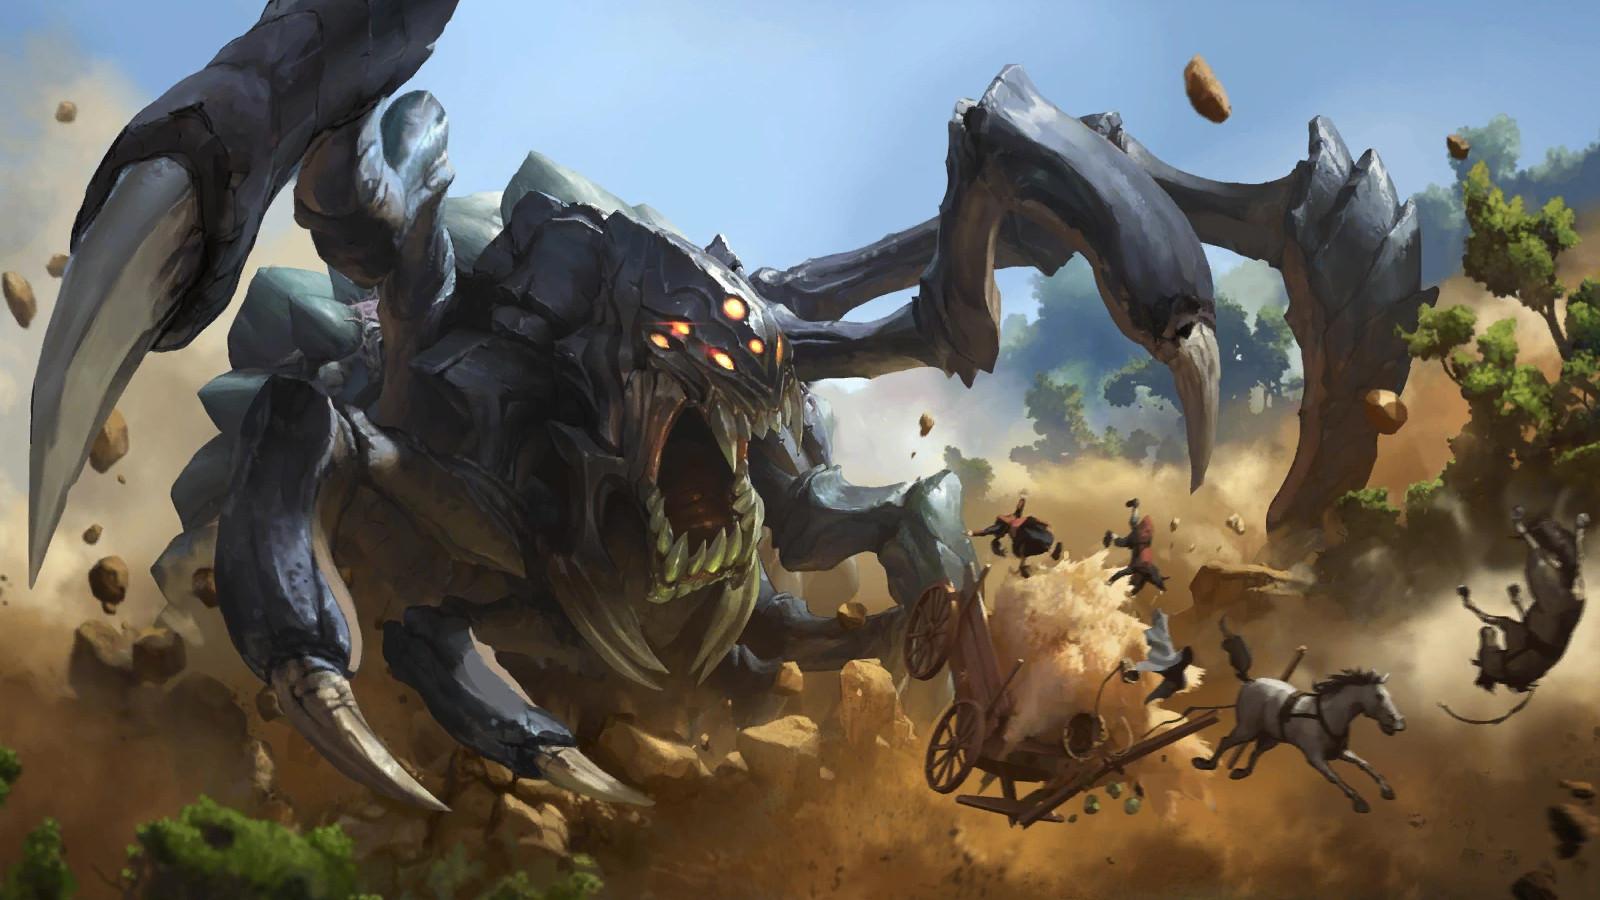 League players want Twisted Treeline and Dominion